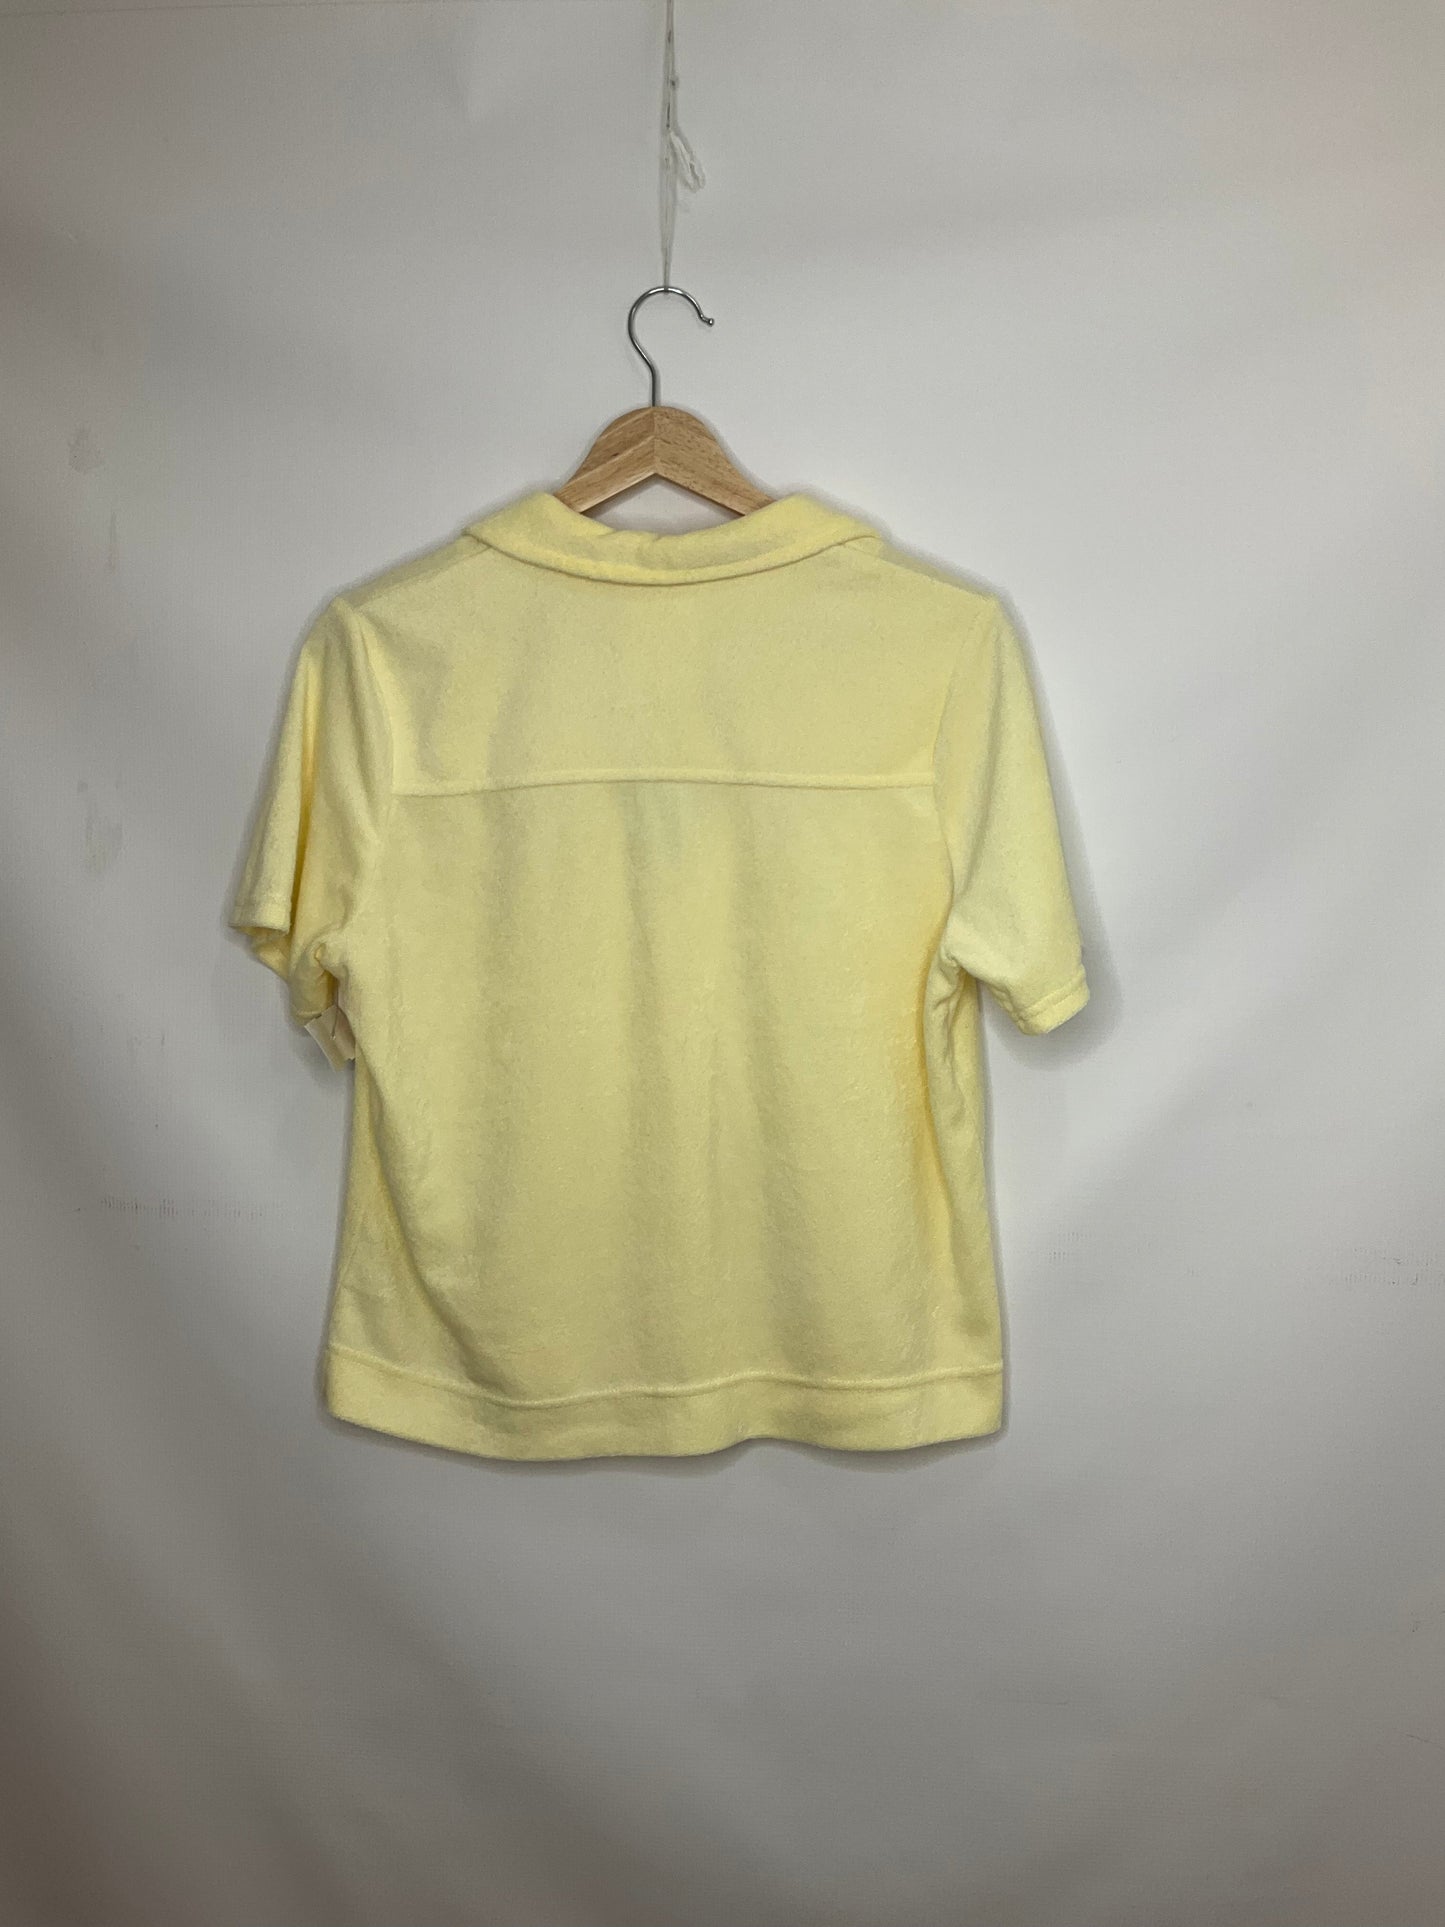 Yellow Top Short Sleeve C And C, Size M